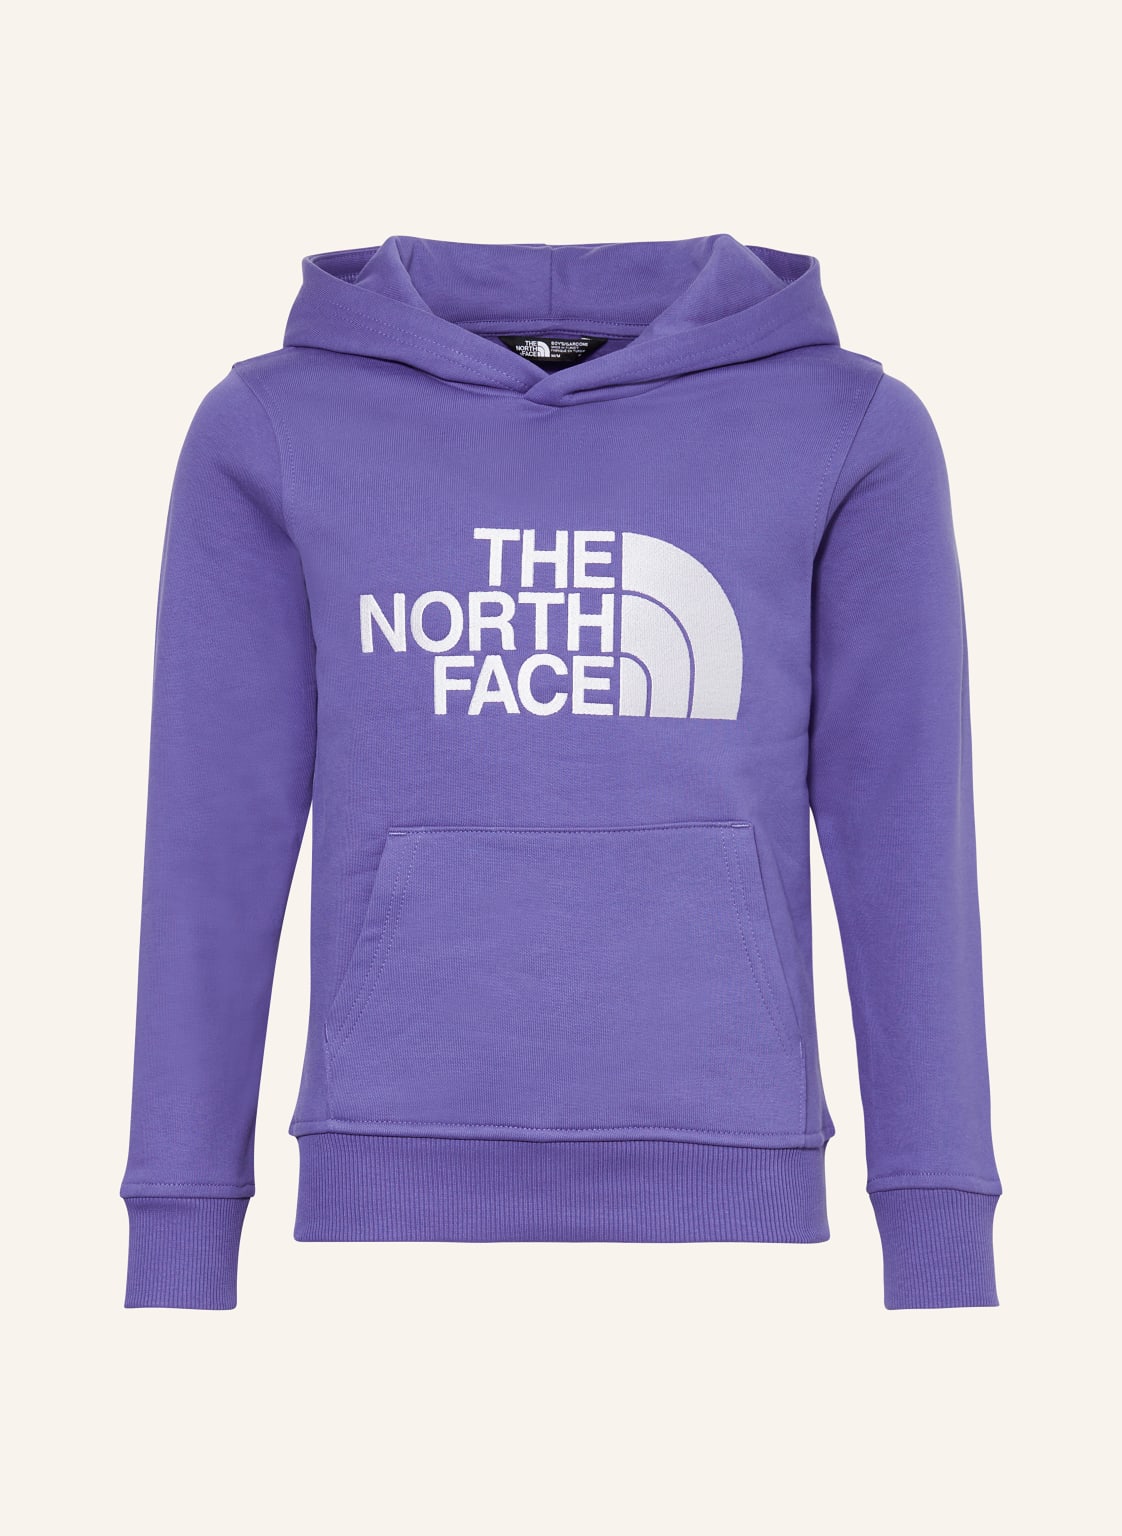 The North Face Hoodie blau von The North Face